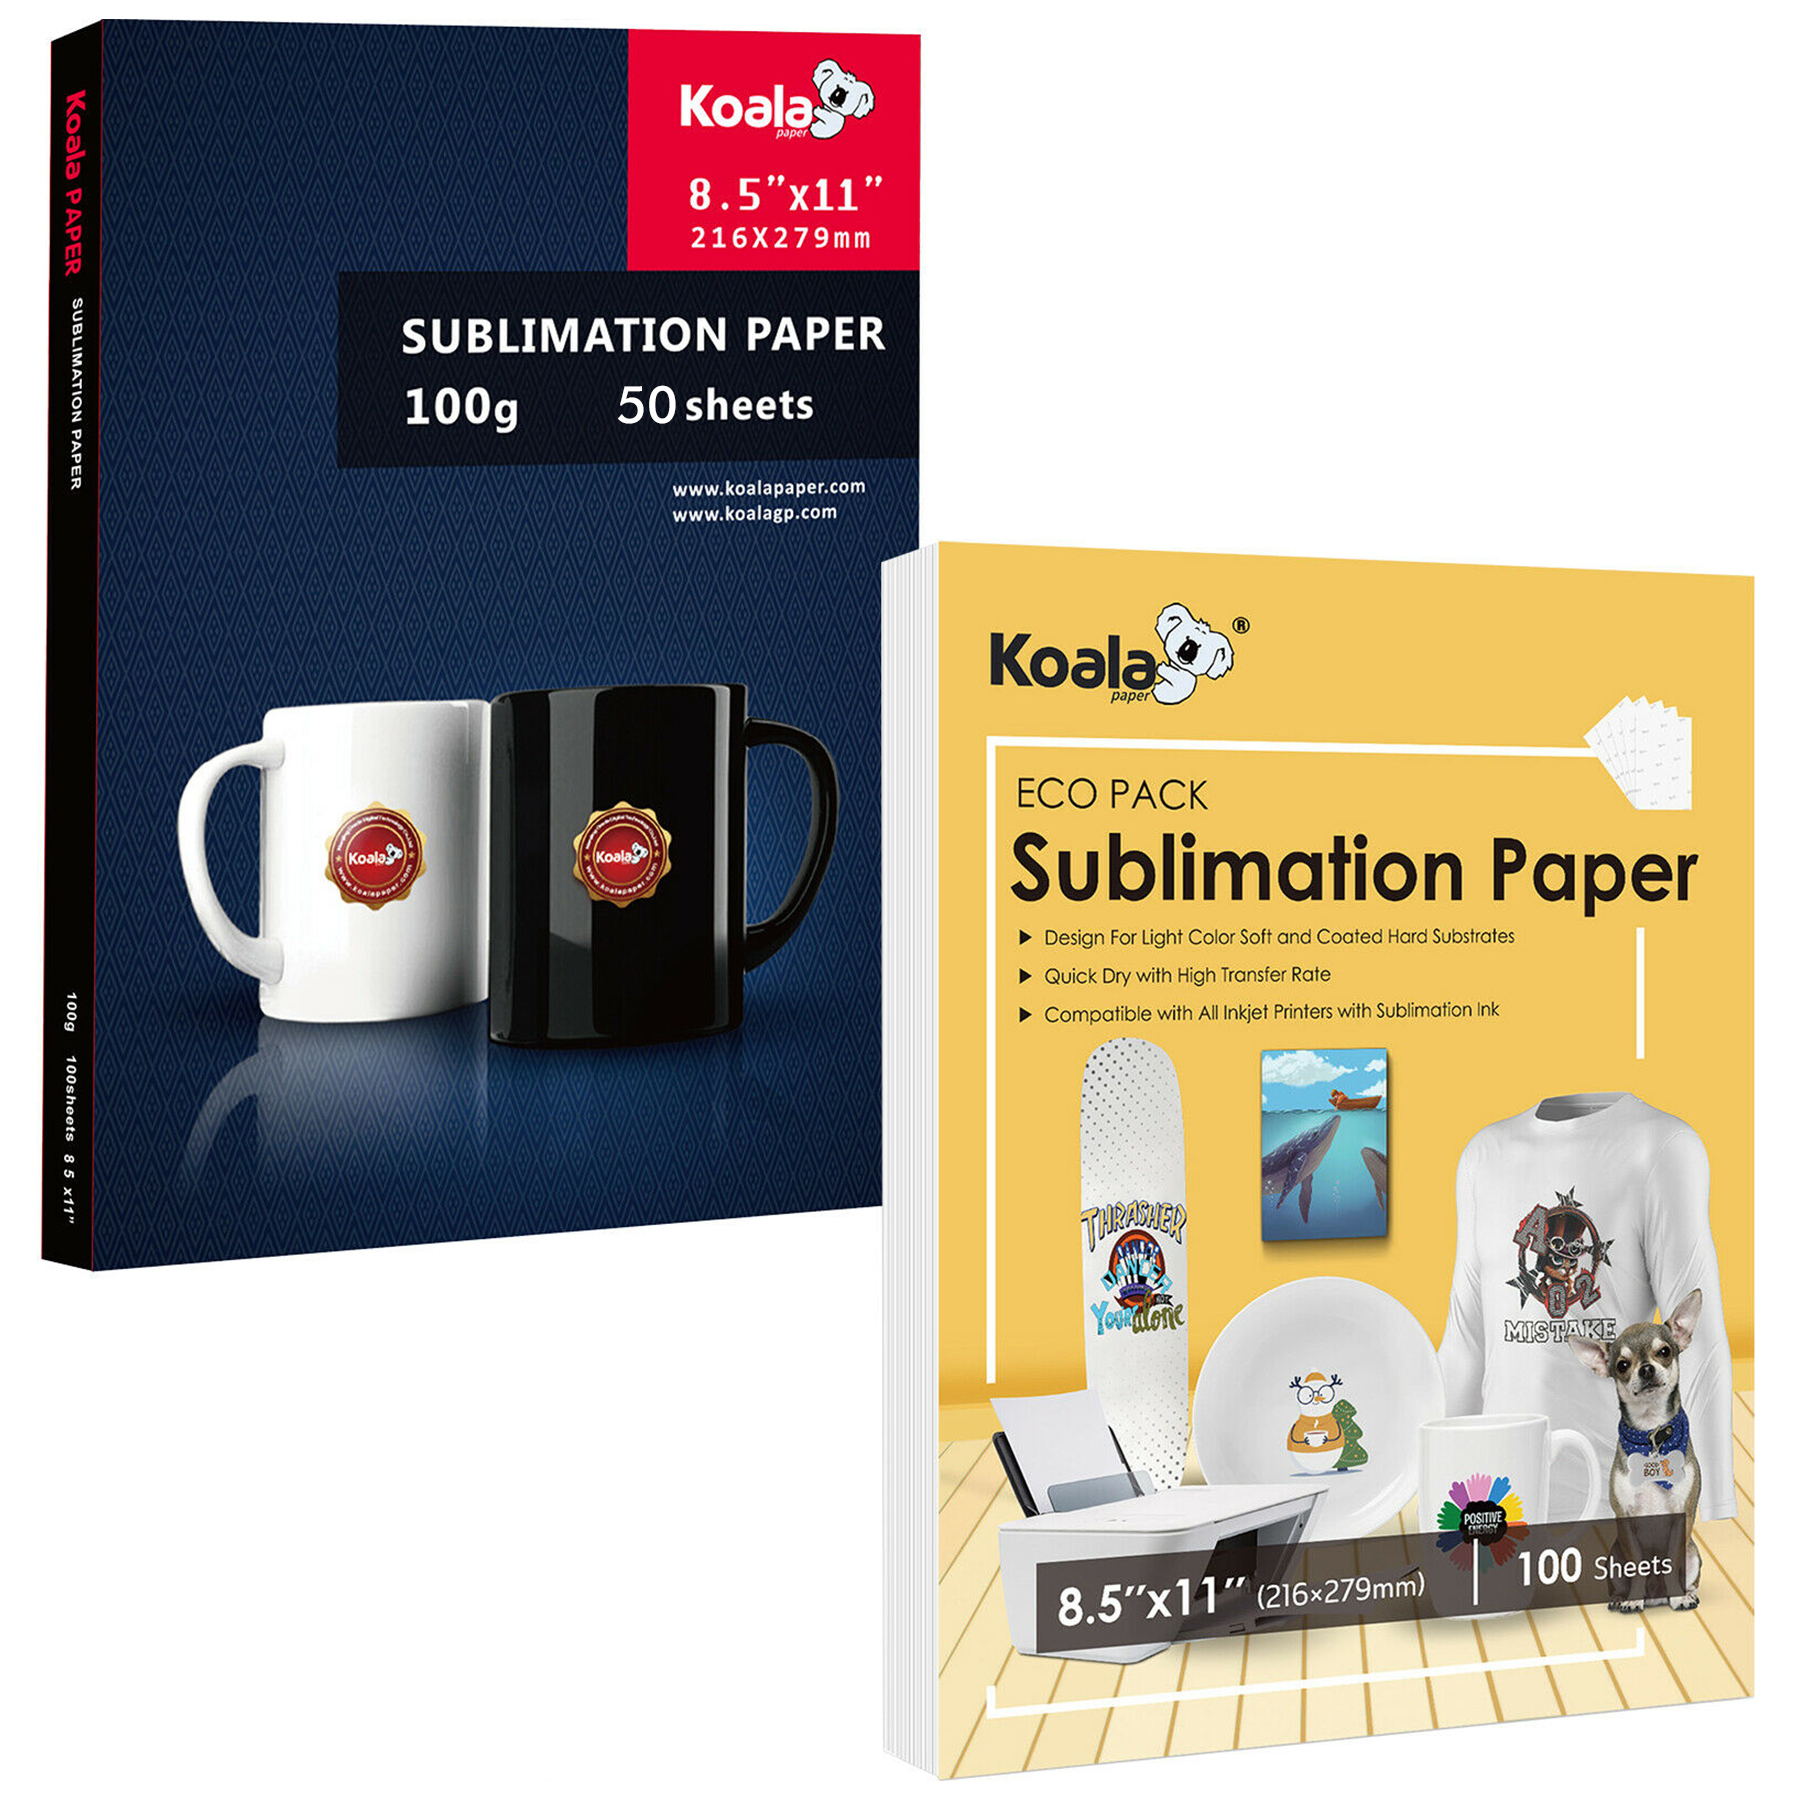 Combo Koala Sublimation Paper 8.5x11 150 Sheets for Epson Printers with  Sublimation Ink, Slow Dry Sublimation Paper 